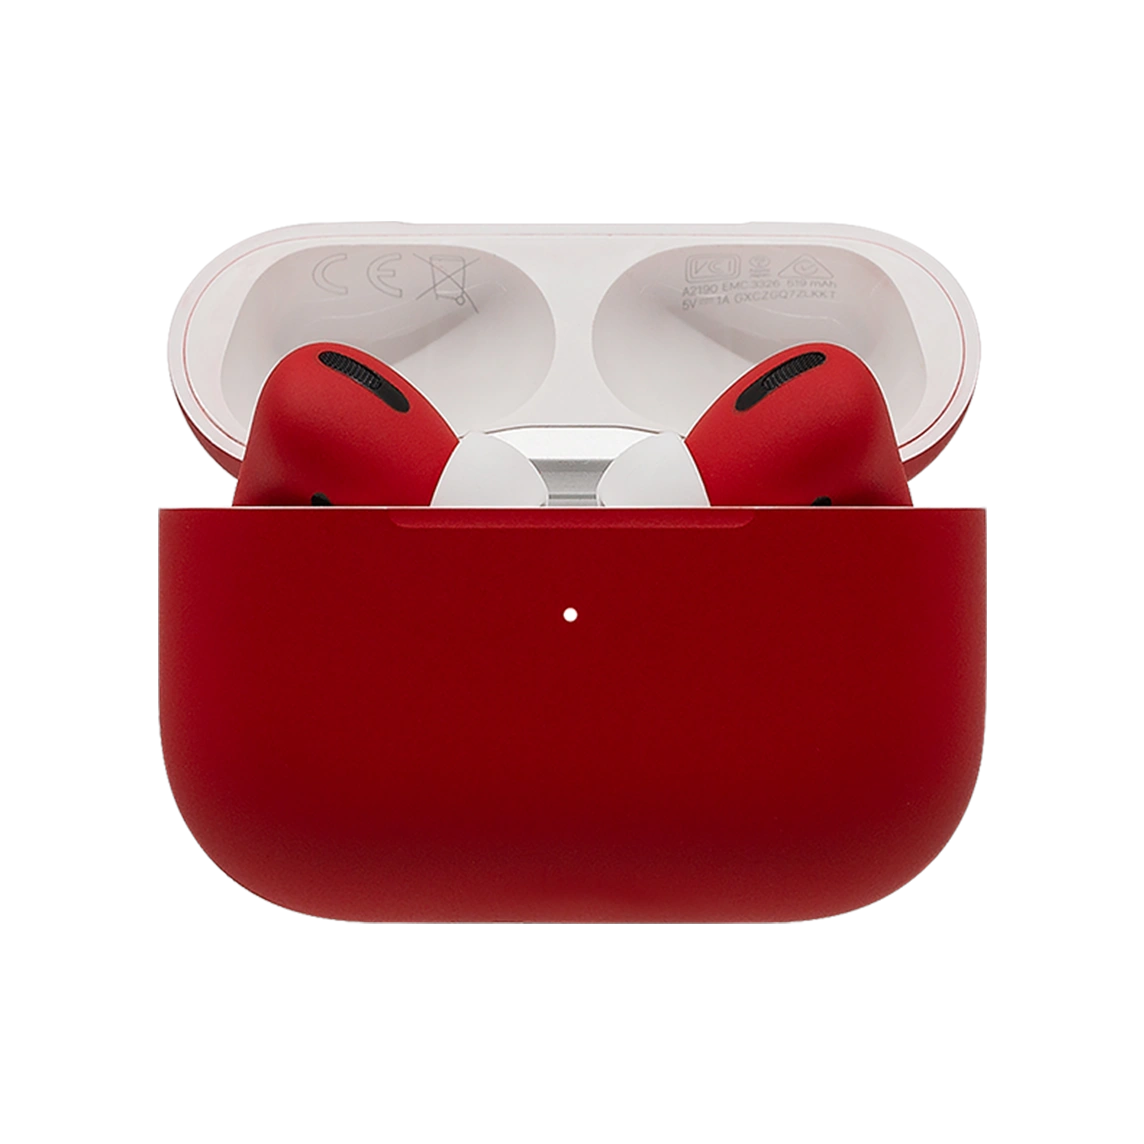 Switch Painted Apple AirPods Pro Ferrari Red Matte